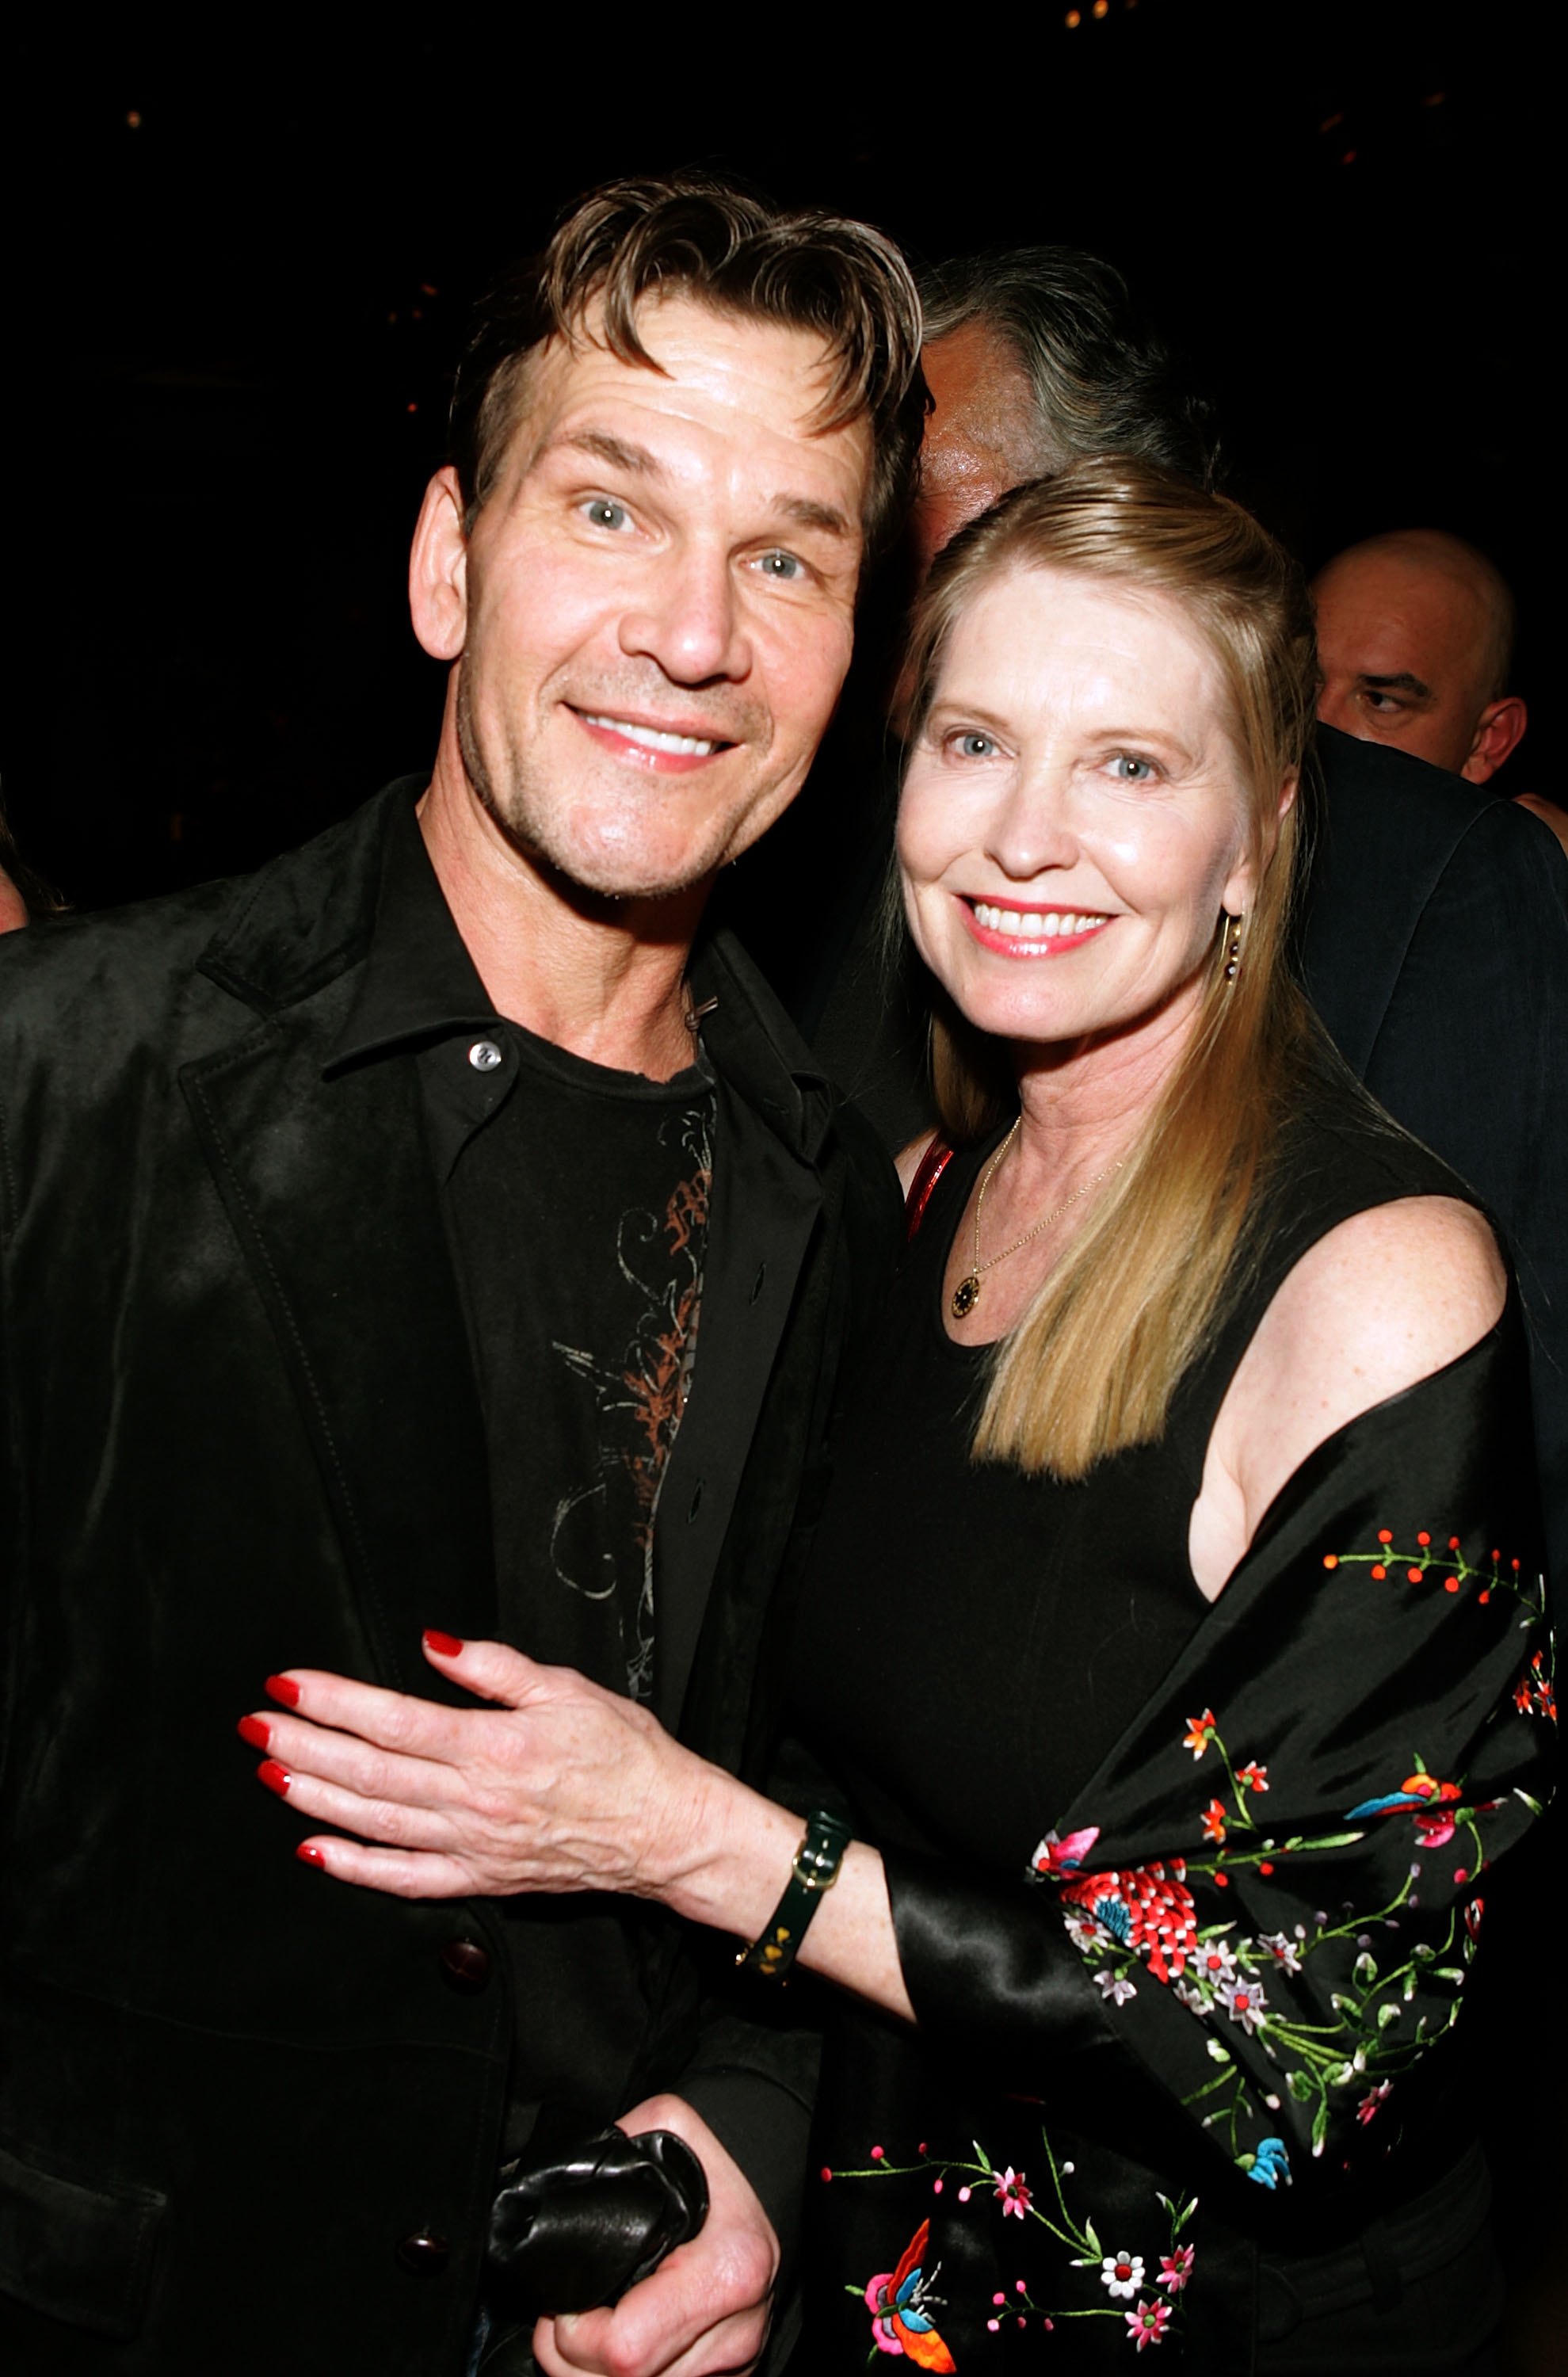 Patrick Swayze and Lisa Niemi in Los Angeles in 2006 | Source: Getty images